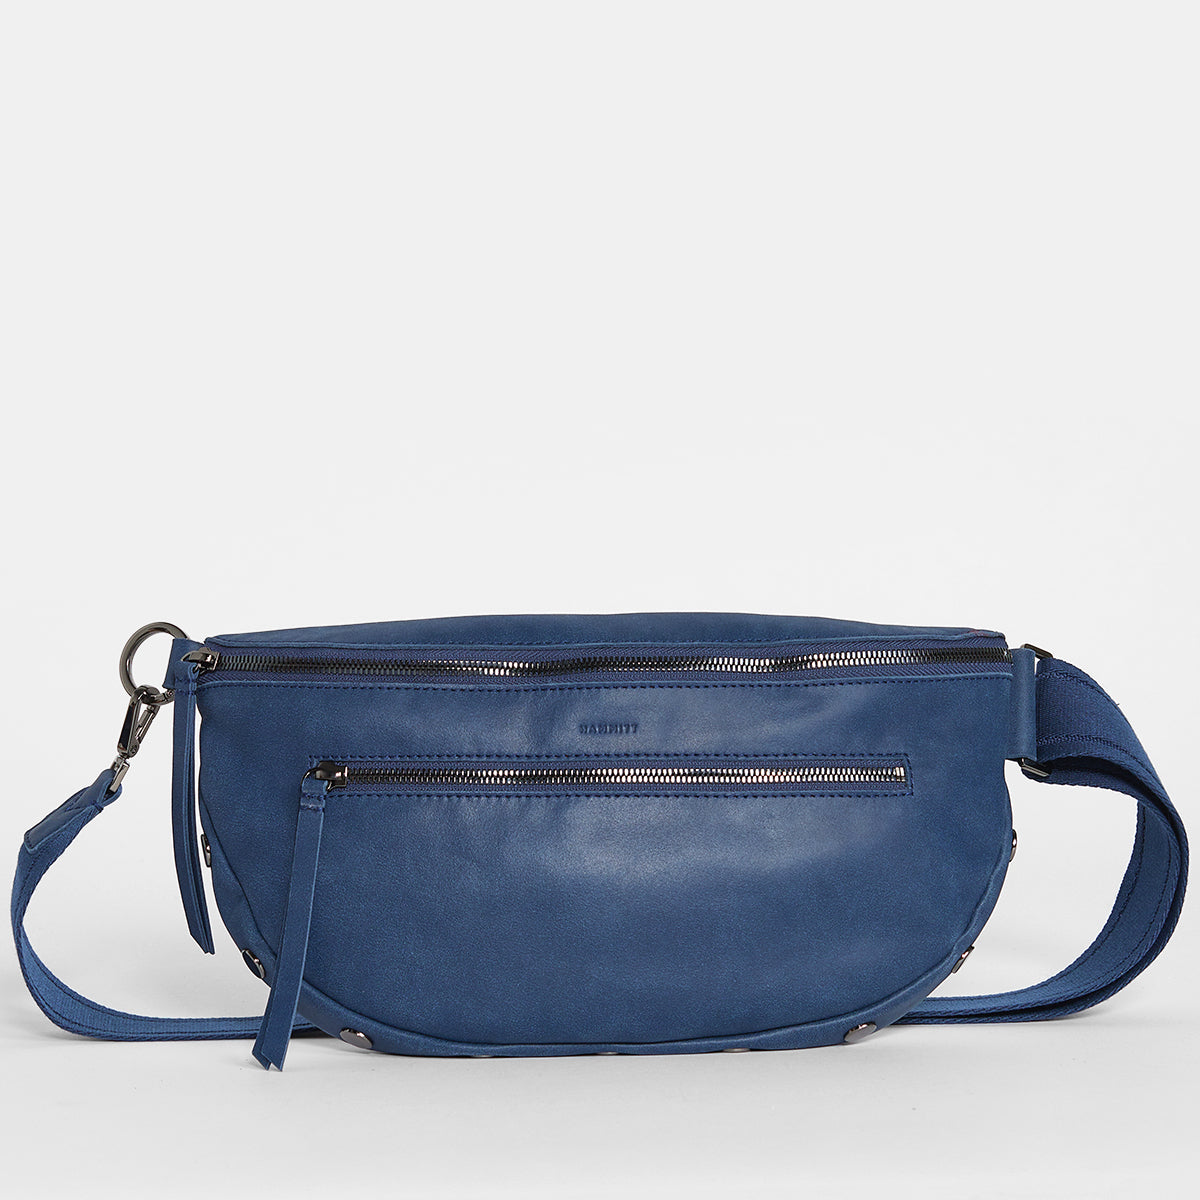 Charles-Crossbody-Lrg-Vintage-Navy-GM-Front-View